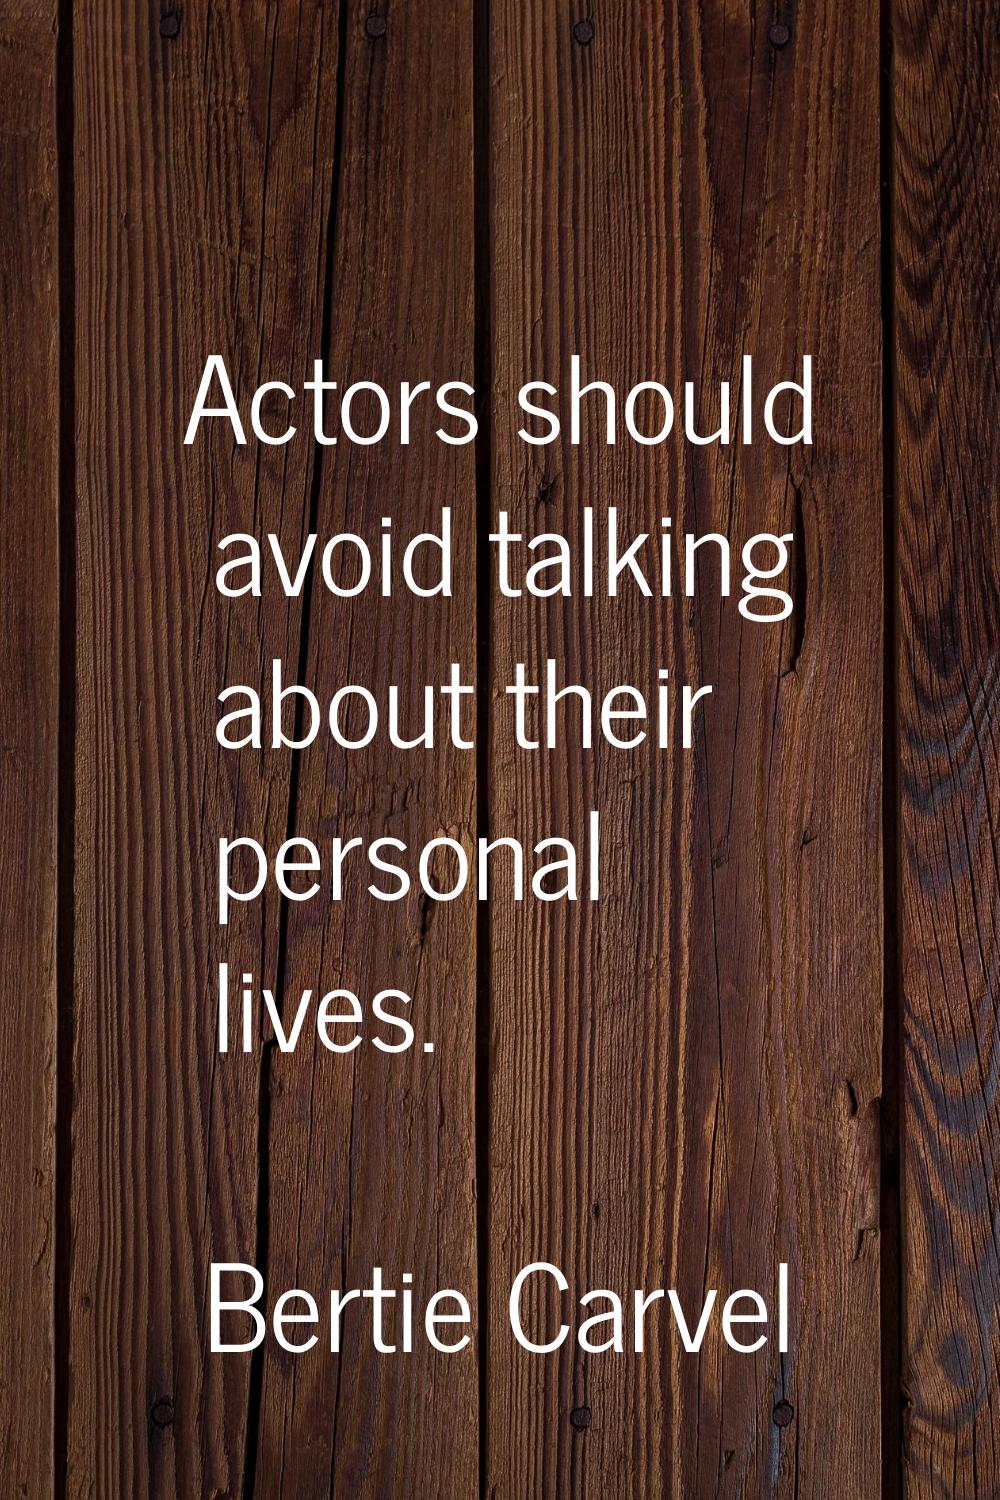 Actors should avoid talking about their personal lives.